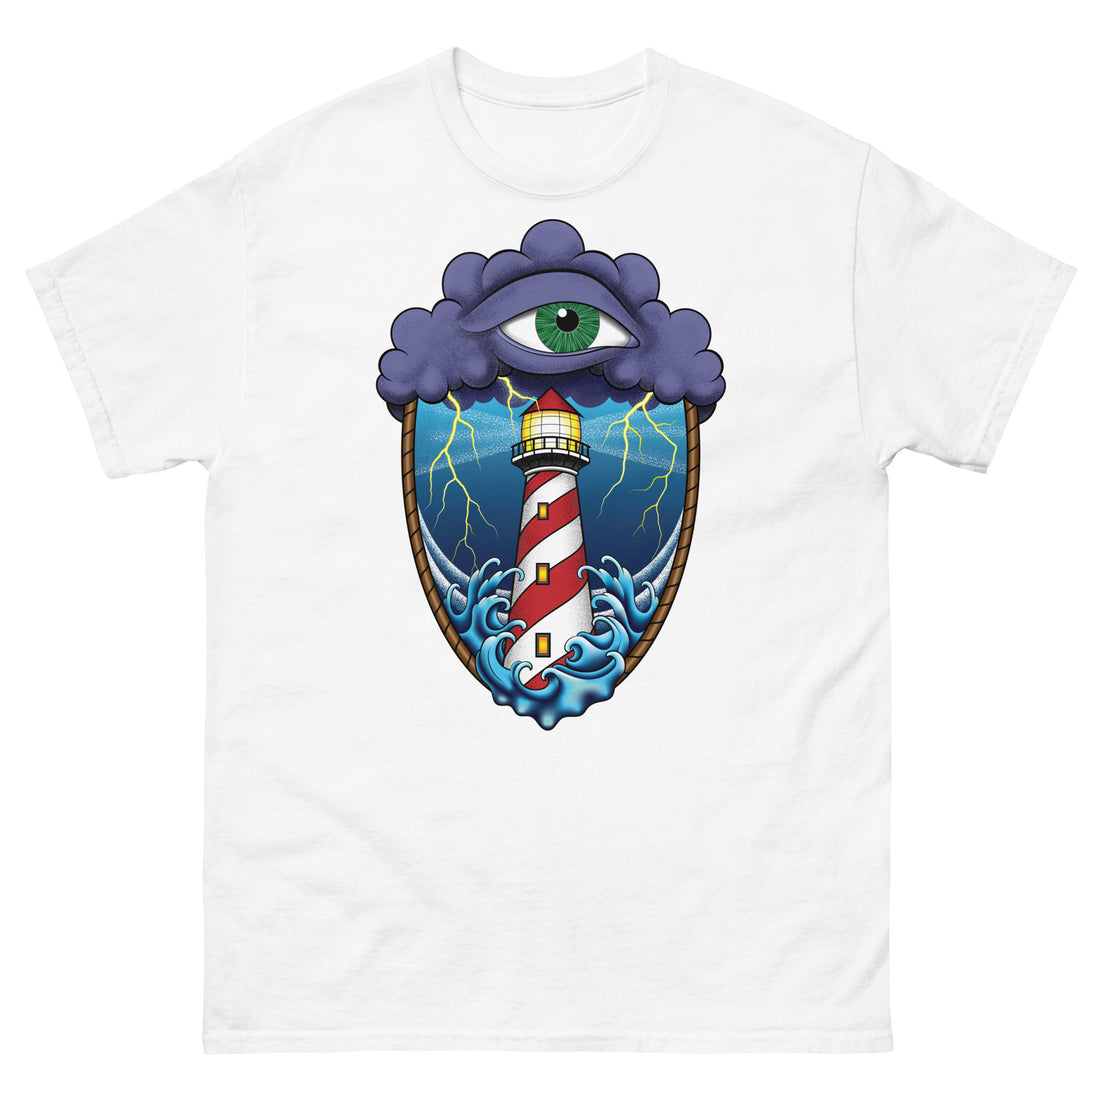 A white t-shirt with an old school eye of the storm tattoo design of large dark purple storm clouds at the top of the design with a green eye in the middle of the clouds.  Below the clouds is an oval shape with brown rope. Inside the rope are stormy seas and a lighthouse with lightning striking in the background.  At the bottom of the design, some of the waves are spilling out of the rope barrier. The sky and seas are hues of blue; the lighthouse is white and red striped like a barber pole.